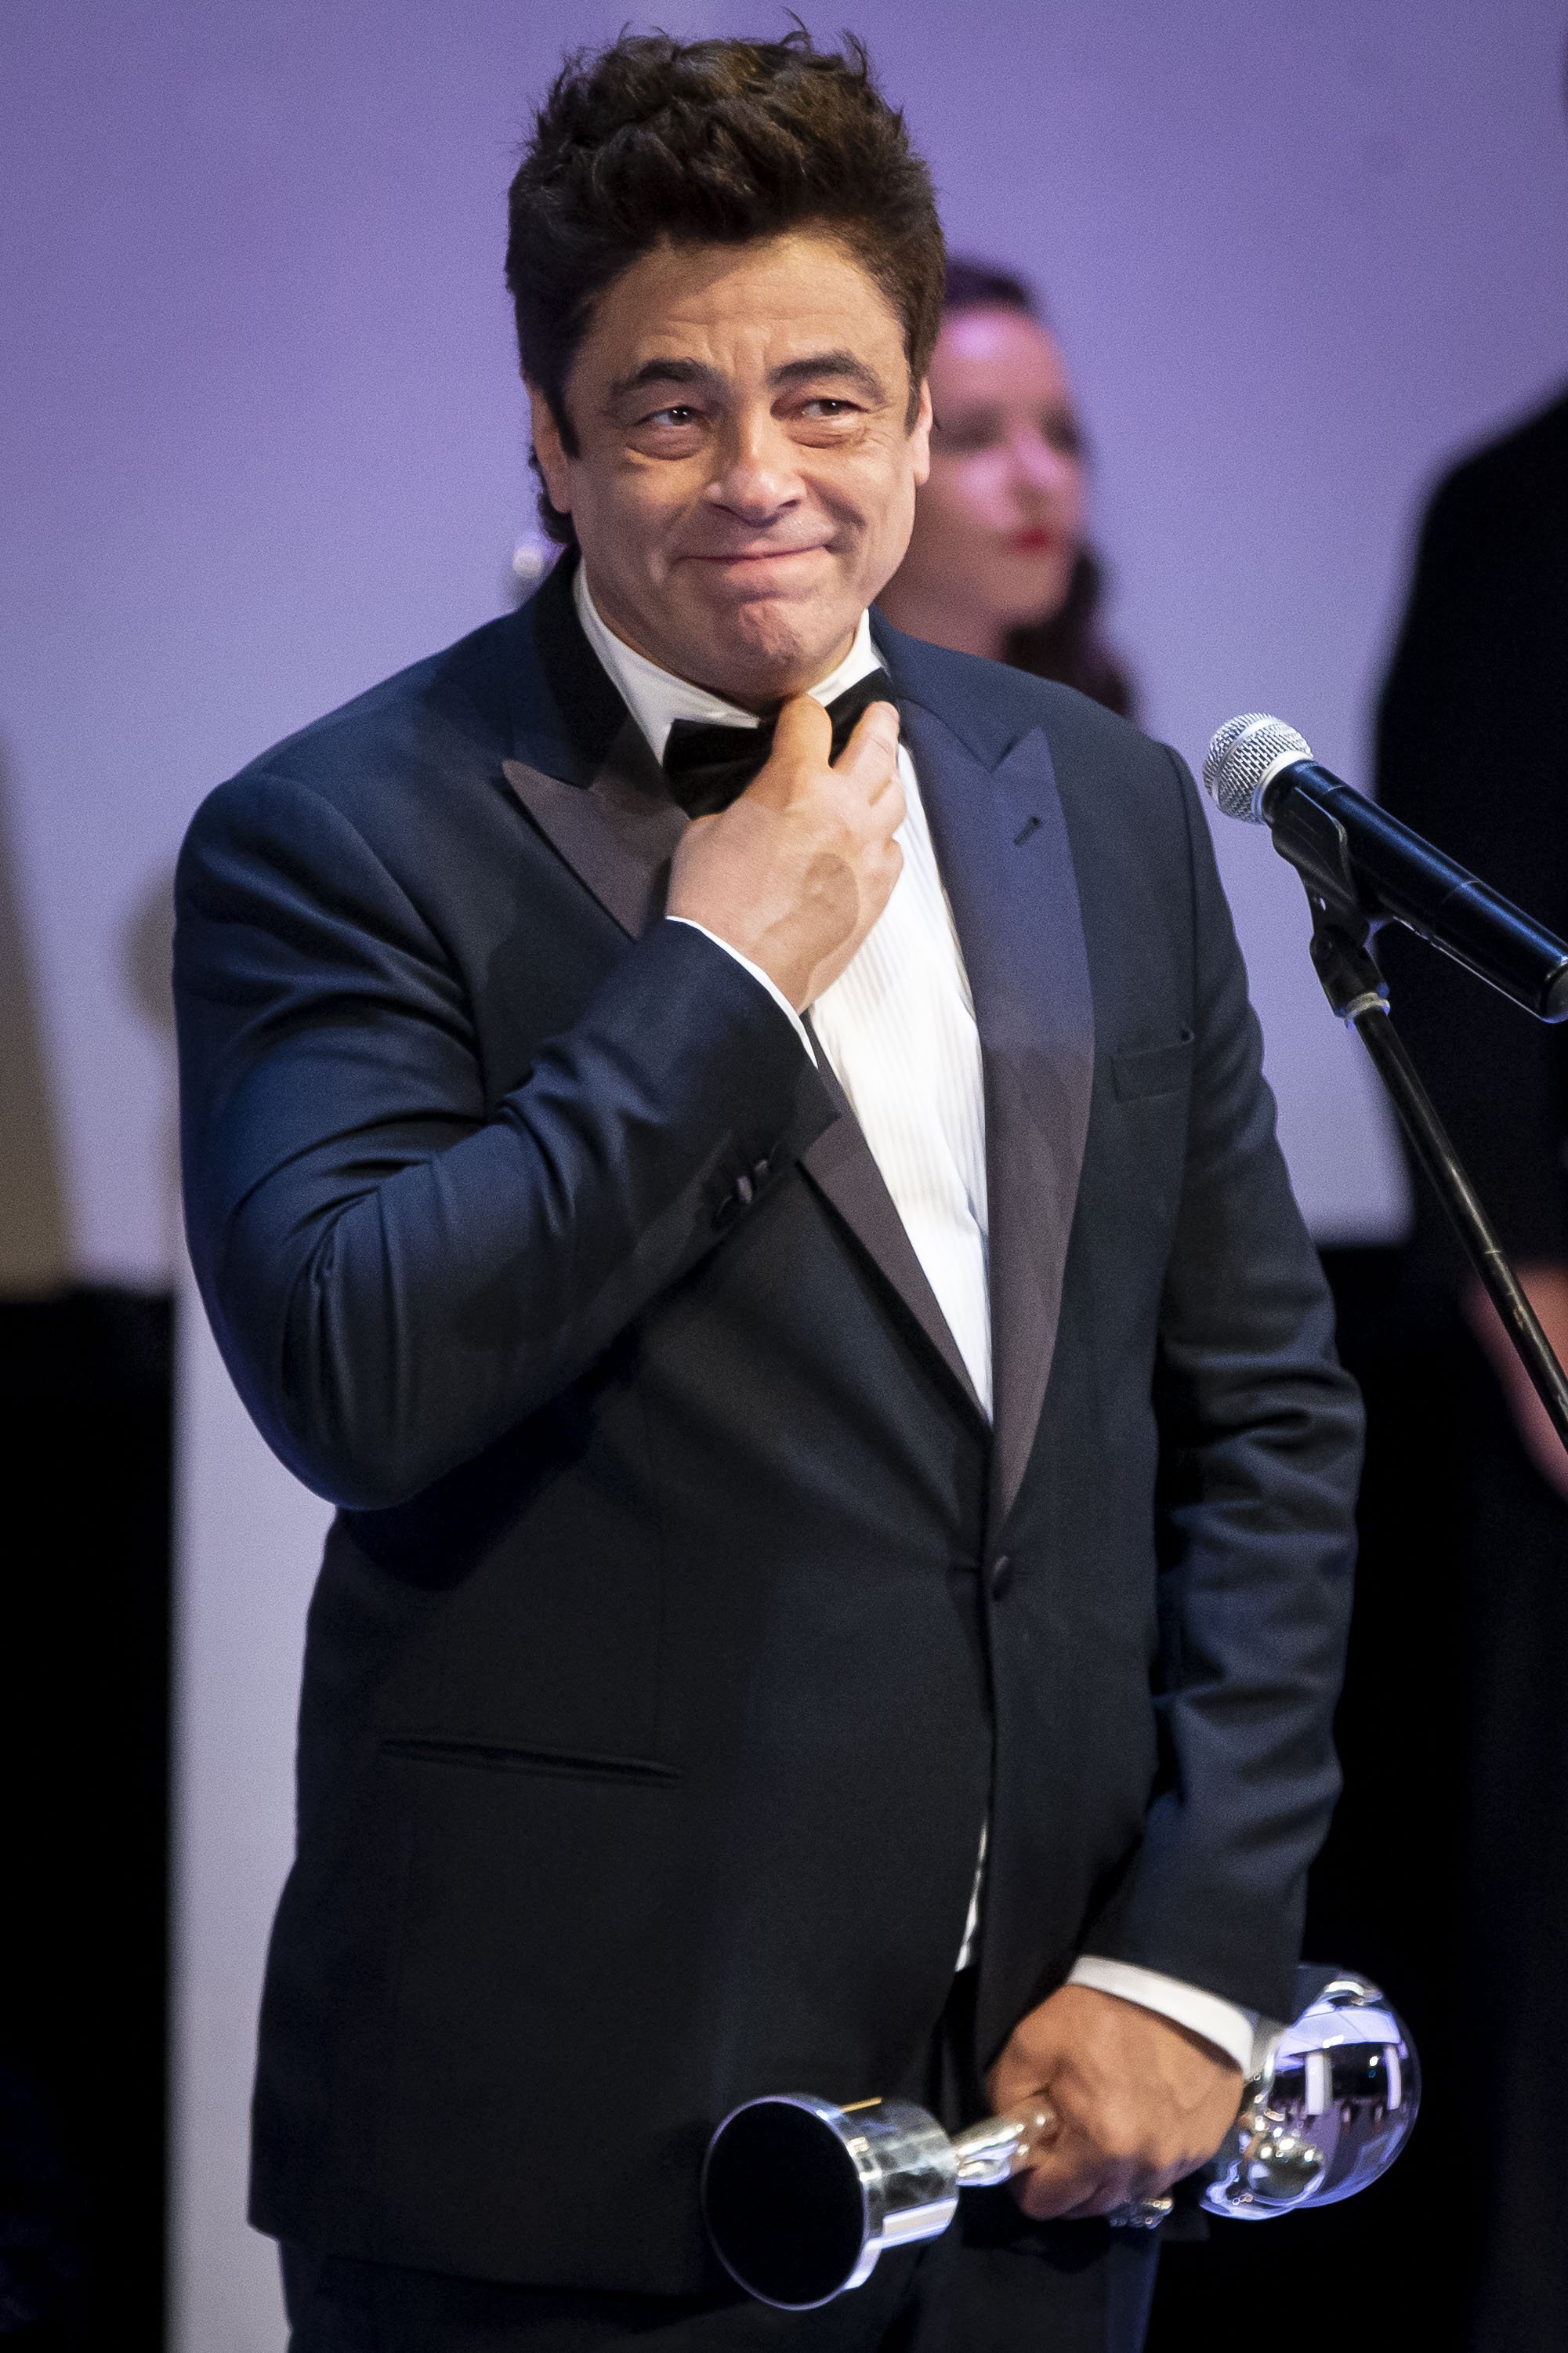 Benicio del Toro during the closing ceremony of the 56th Karlovy Vary International Film Festival on July 9, 2022, in Karlovy Vary, Czech Republic. | Source: Getty Images